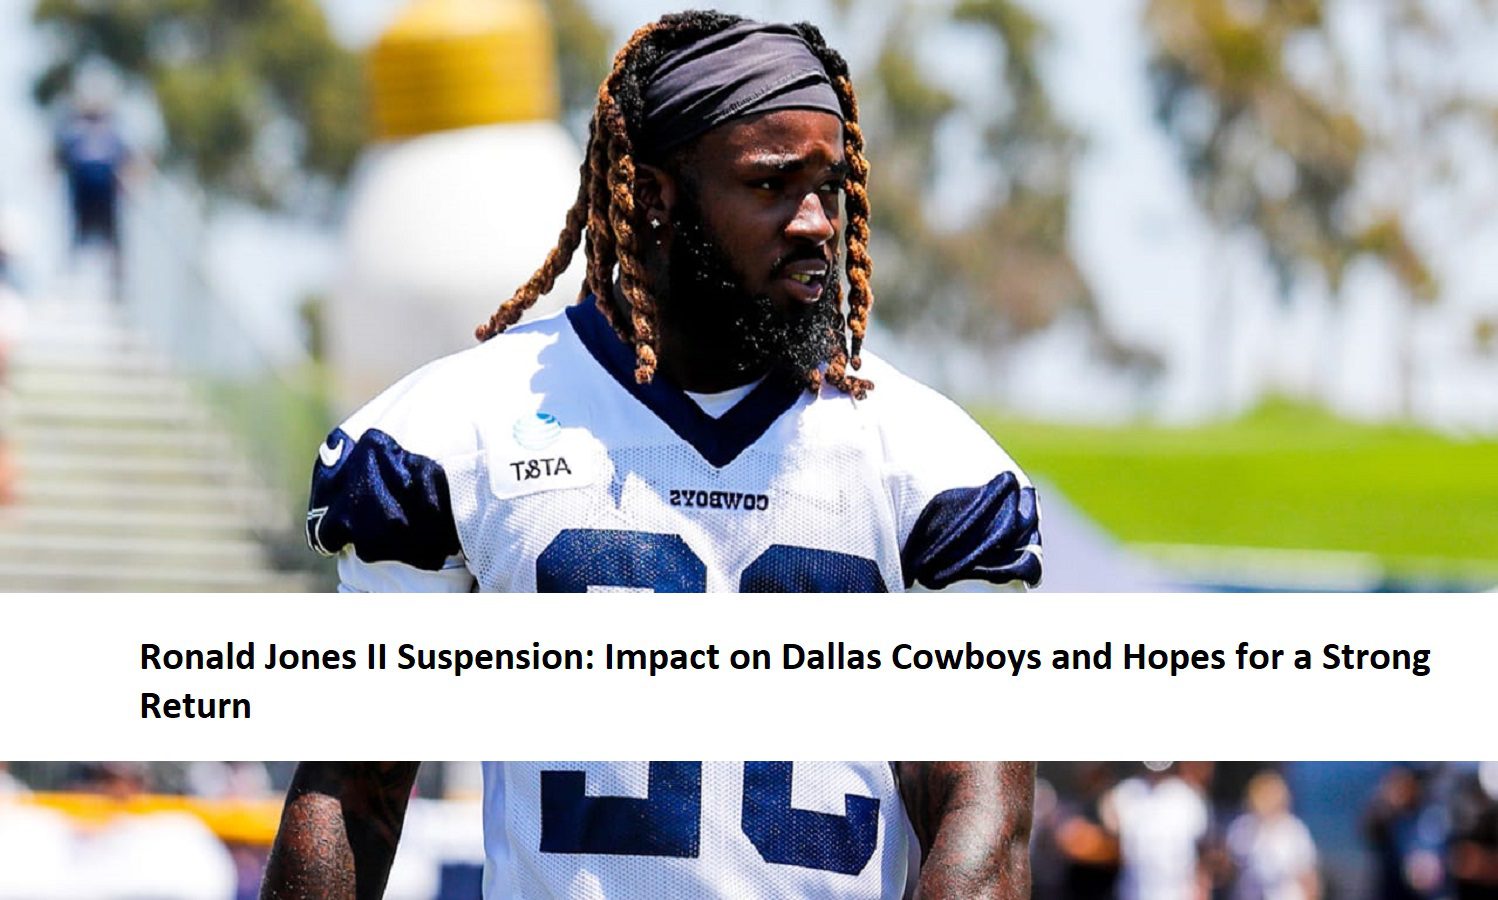 ronald-jones-ii-suspension-impact-on-dallas-cowboys-and-hopes-for-a-strong-retur